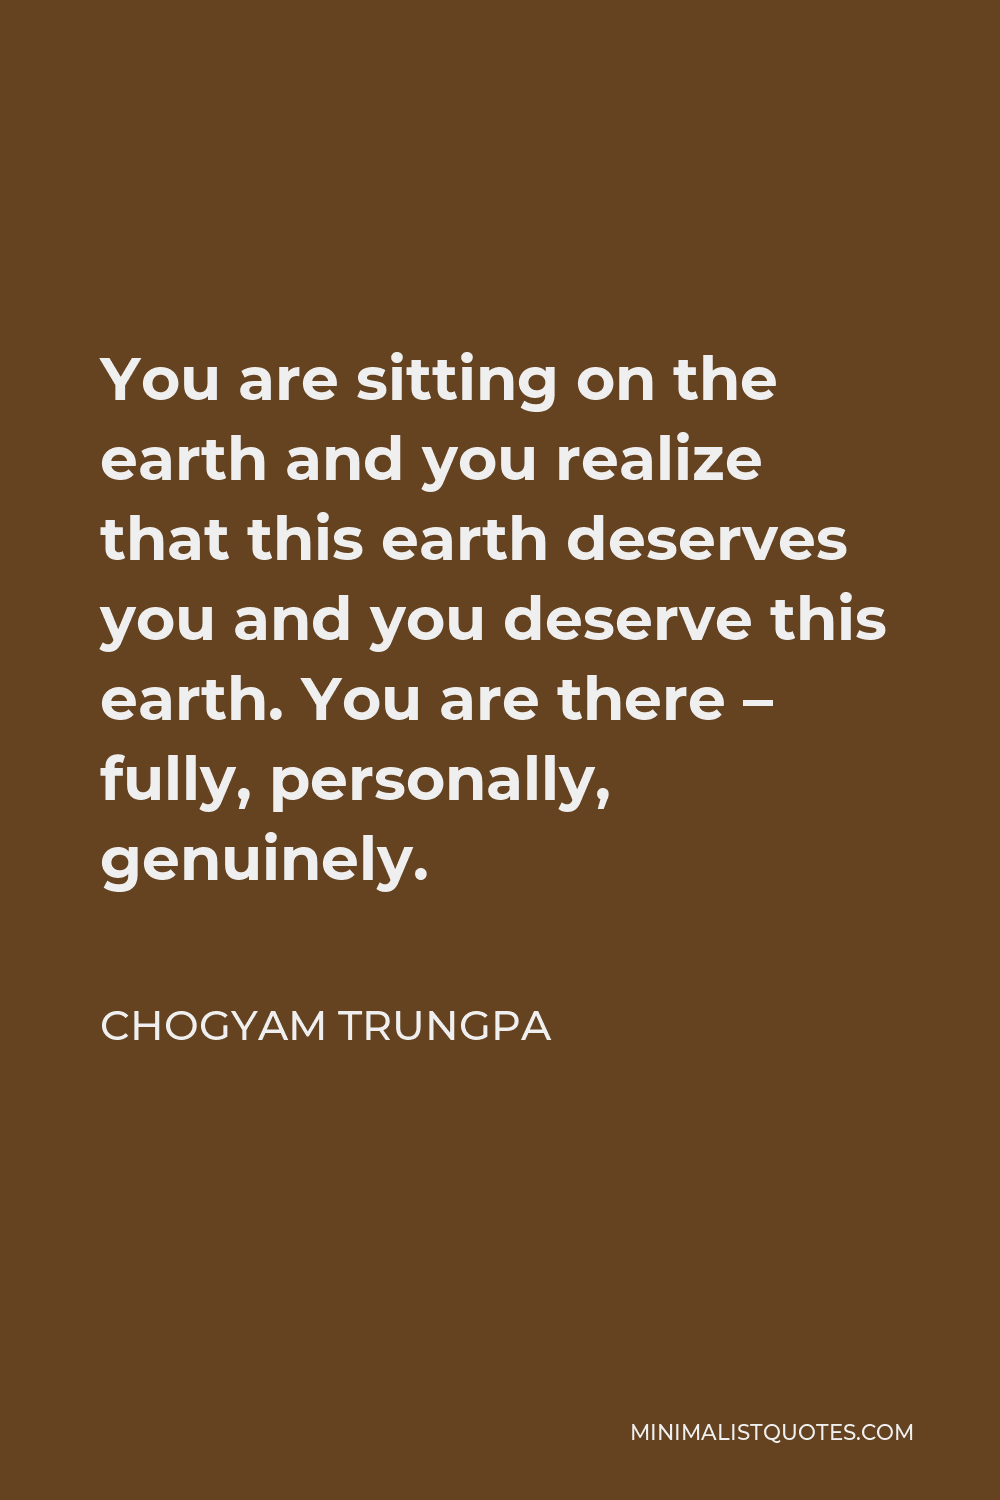 Chogyam Trungpa Quote - You are sitting on the earth and you realize that this earth deserves you and you deserve this earth. You are there – fully, personally, genuinely.